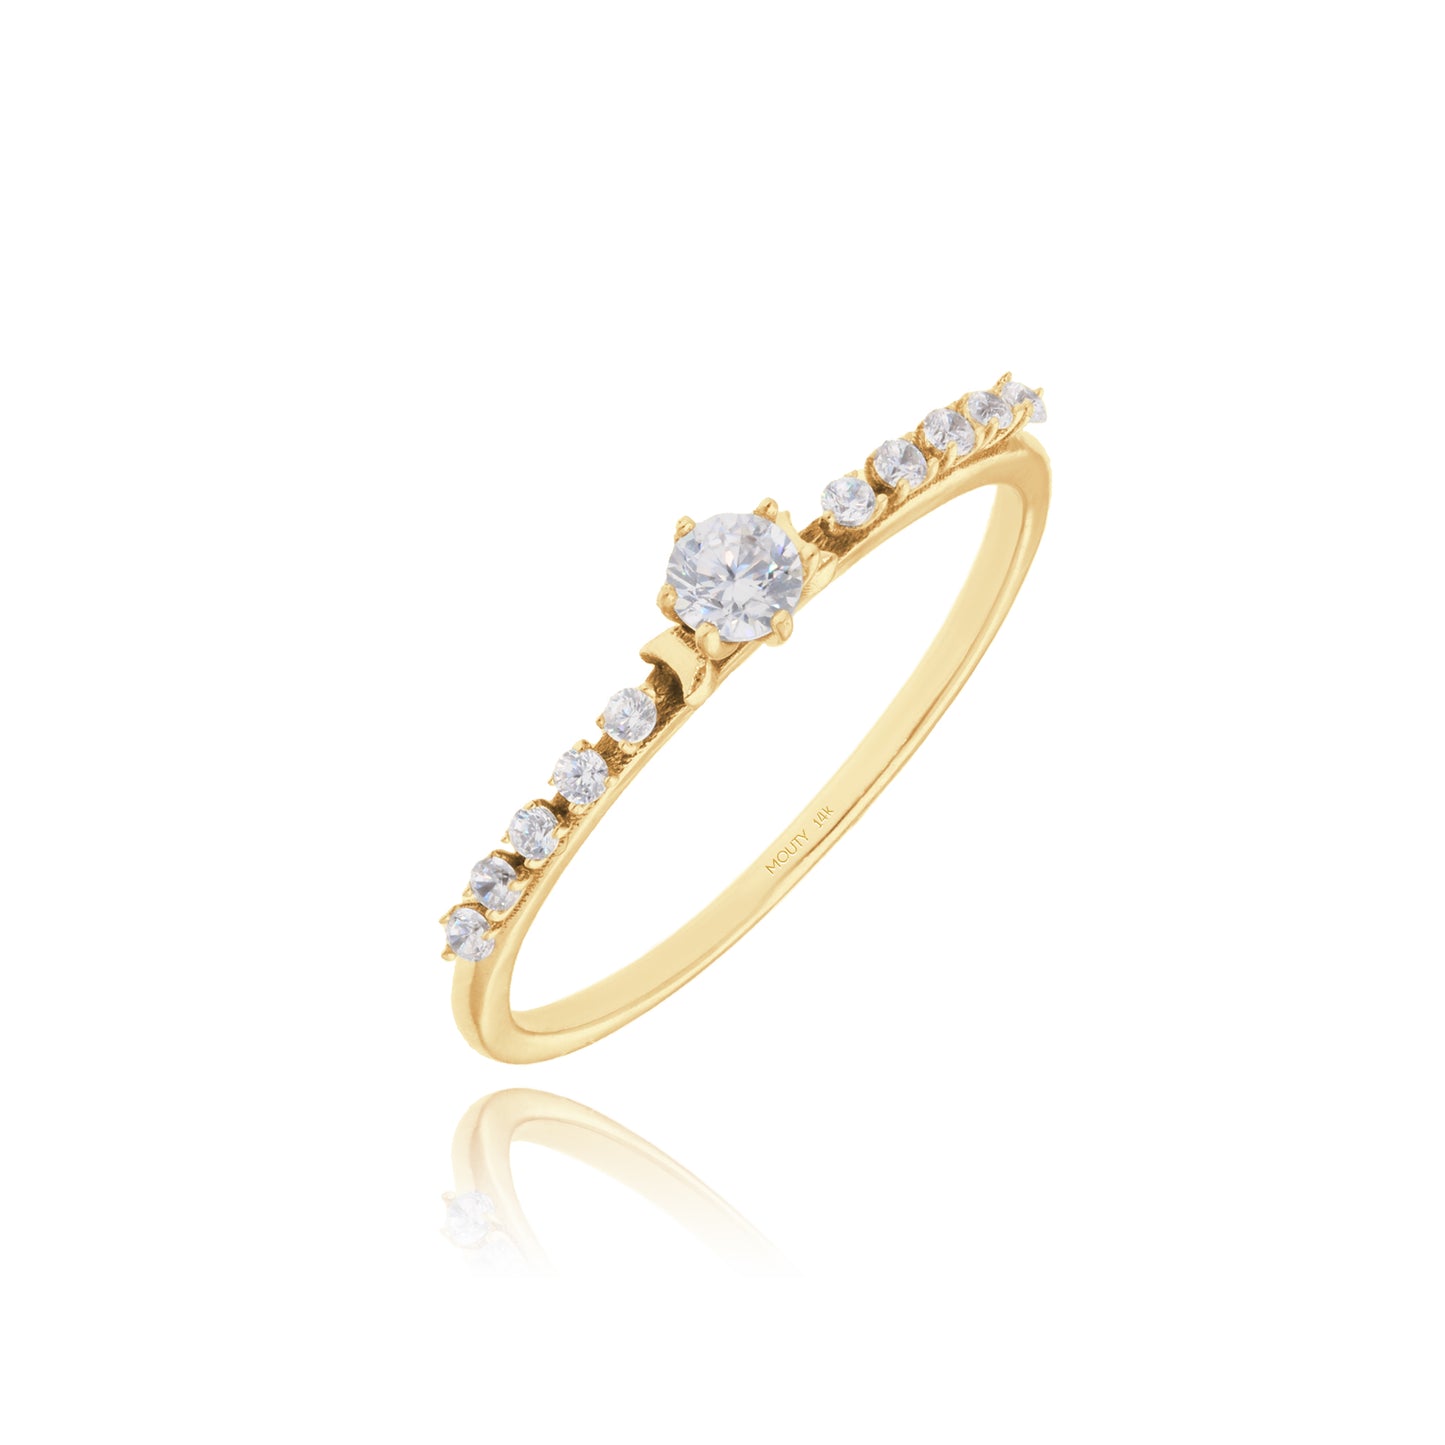 Danielle Ring in 14k Yellow Gold with Zirconia